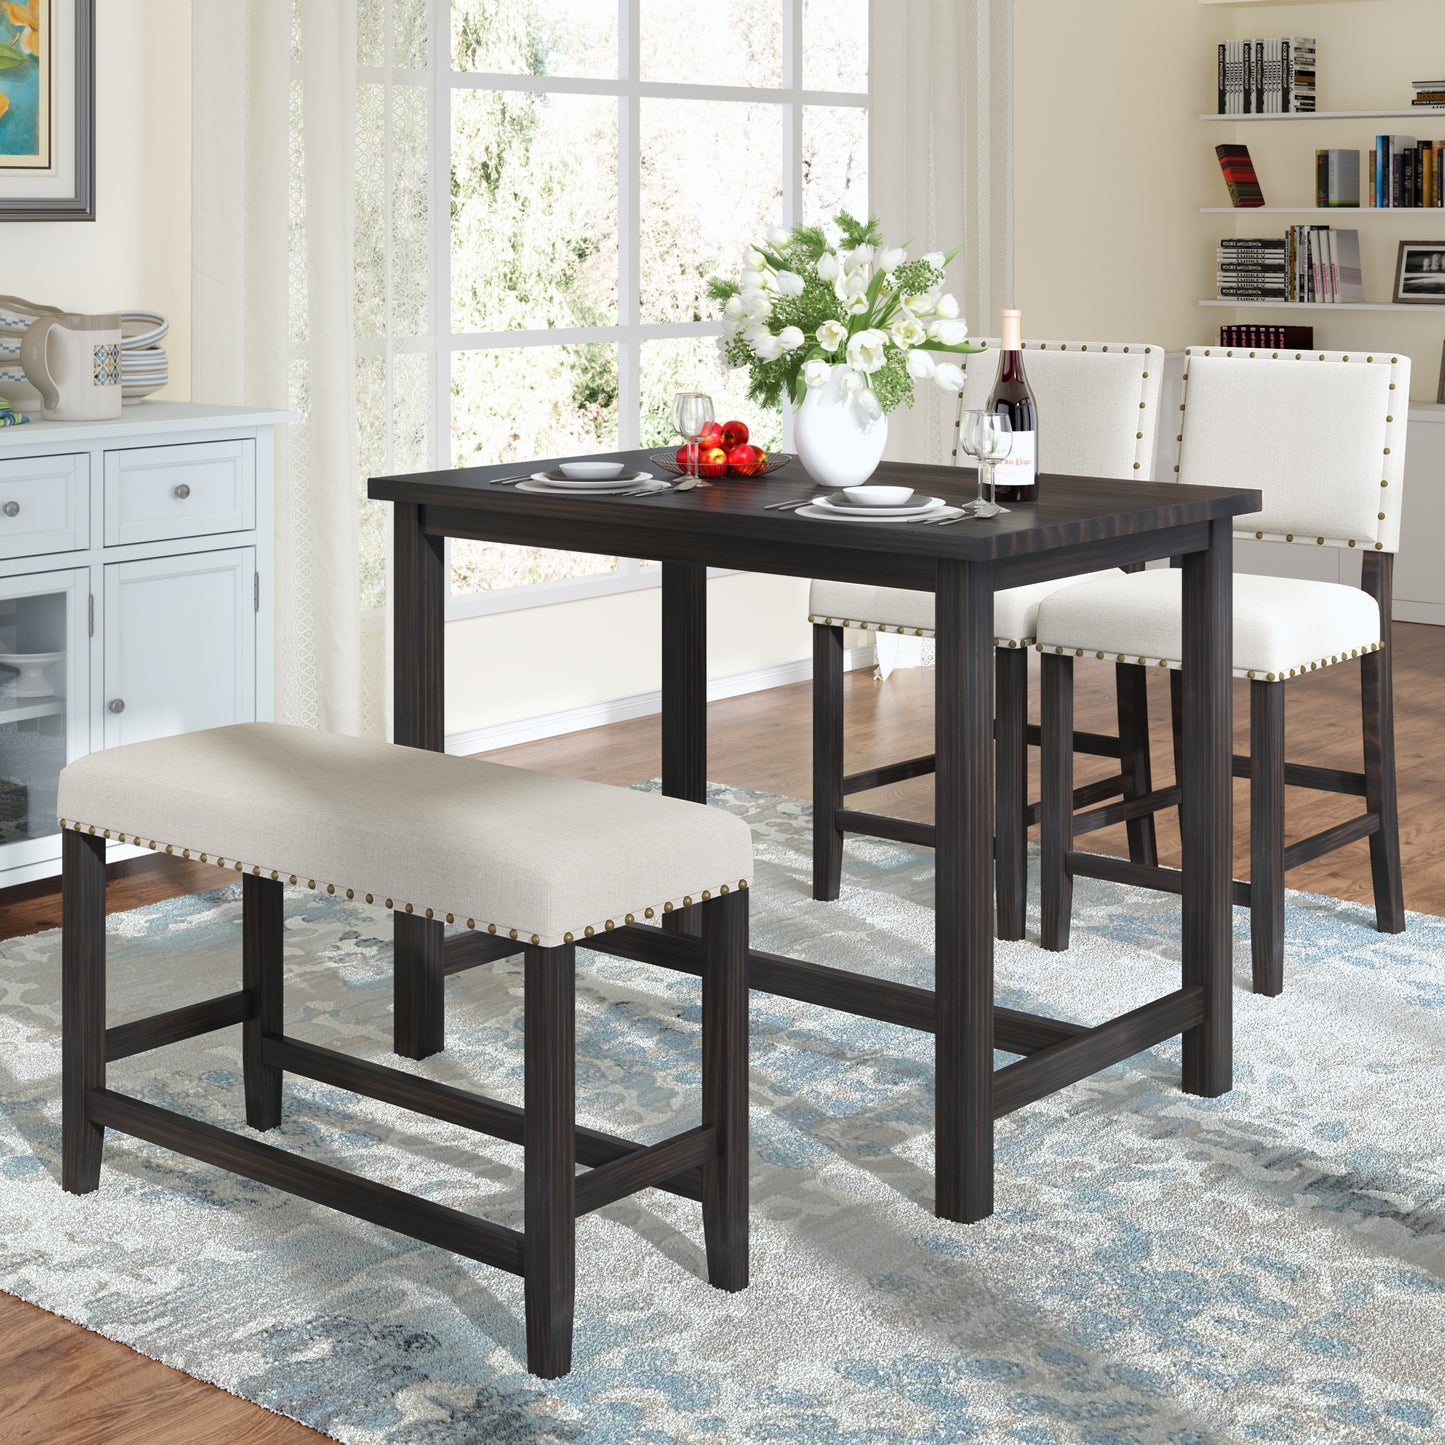 TOPMAX 4 Piece Rustic Wooden Counter Height Dining Table Set with Upholstered Bench